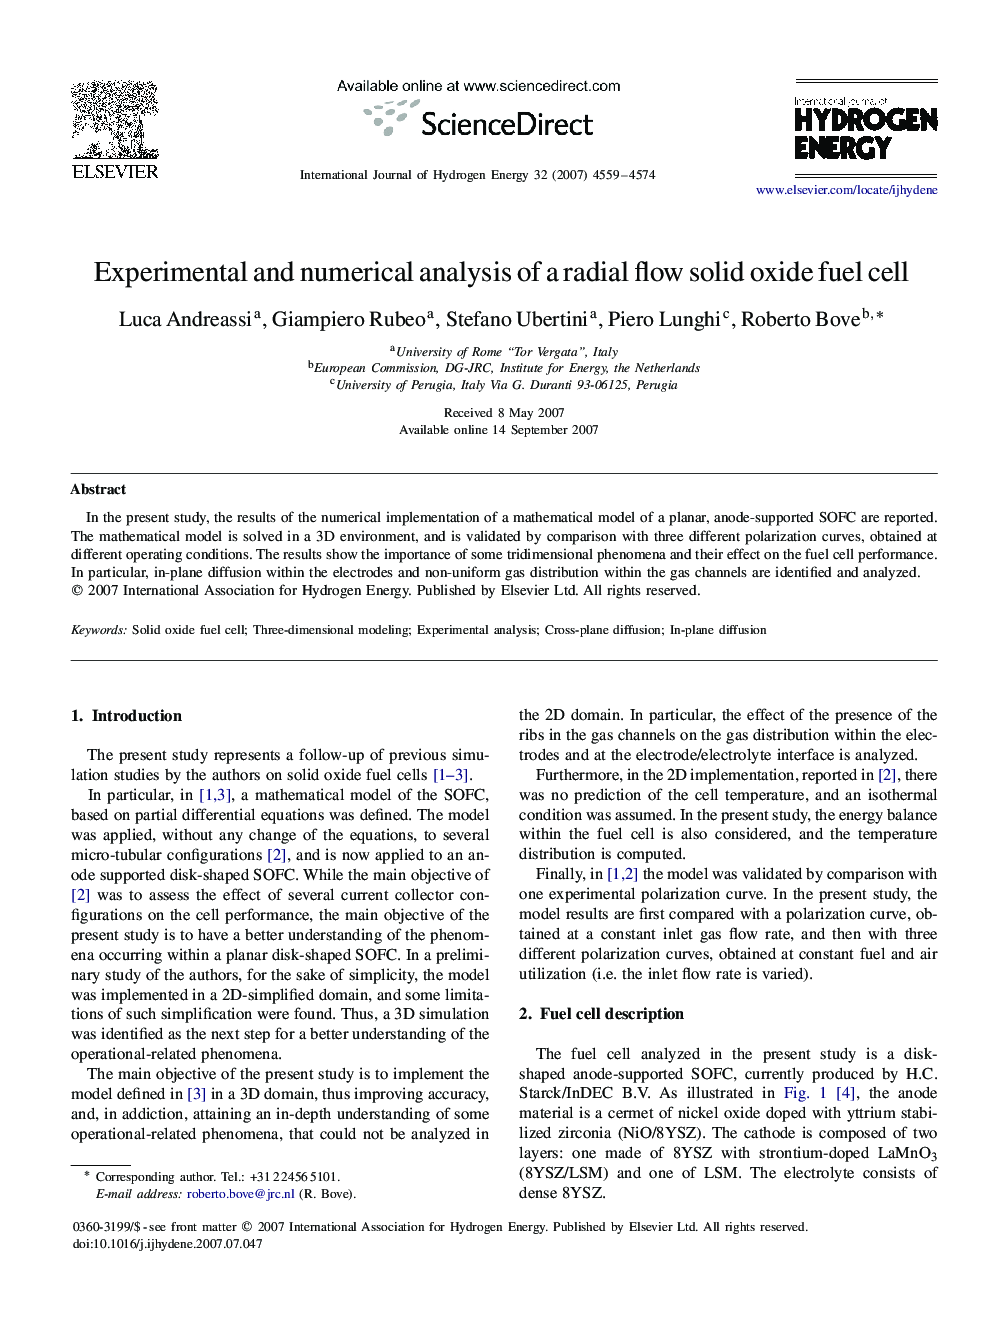 Experimental and numerical analysis of a radial flow solid oxide fuel cell